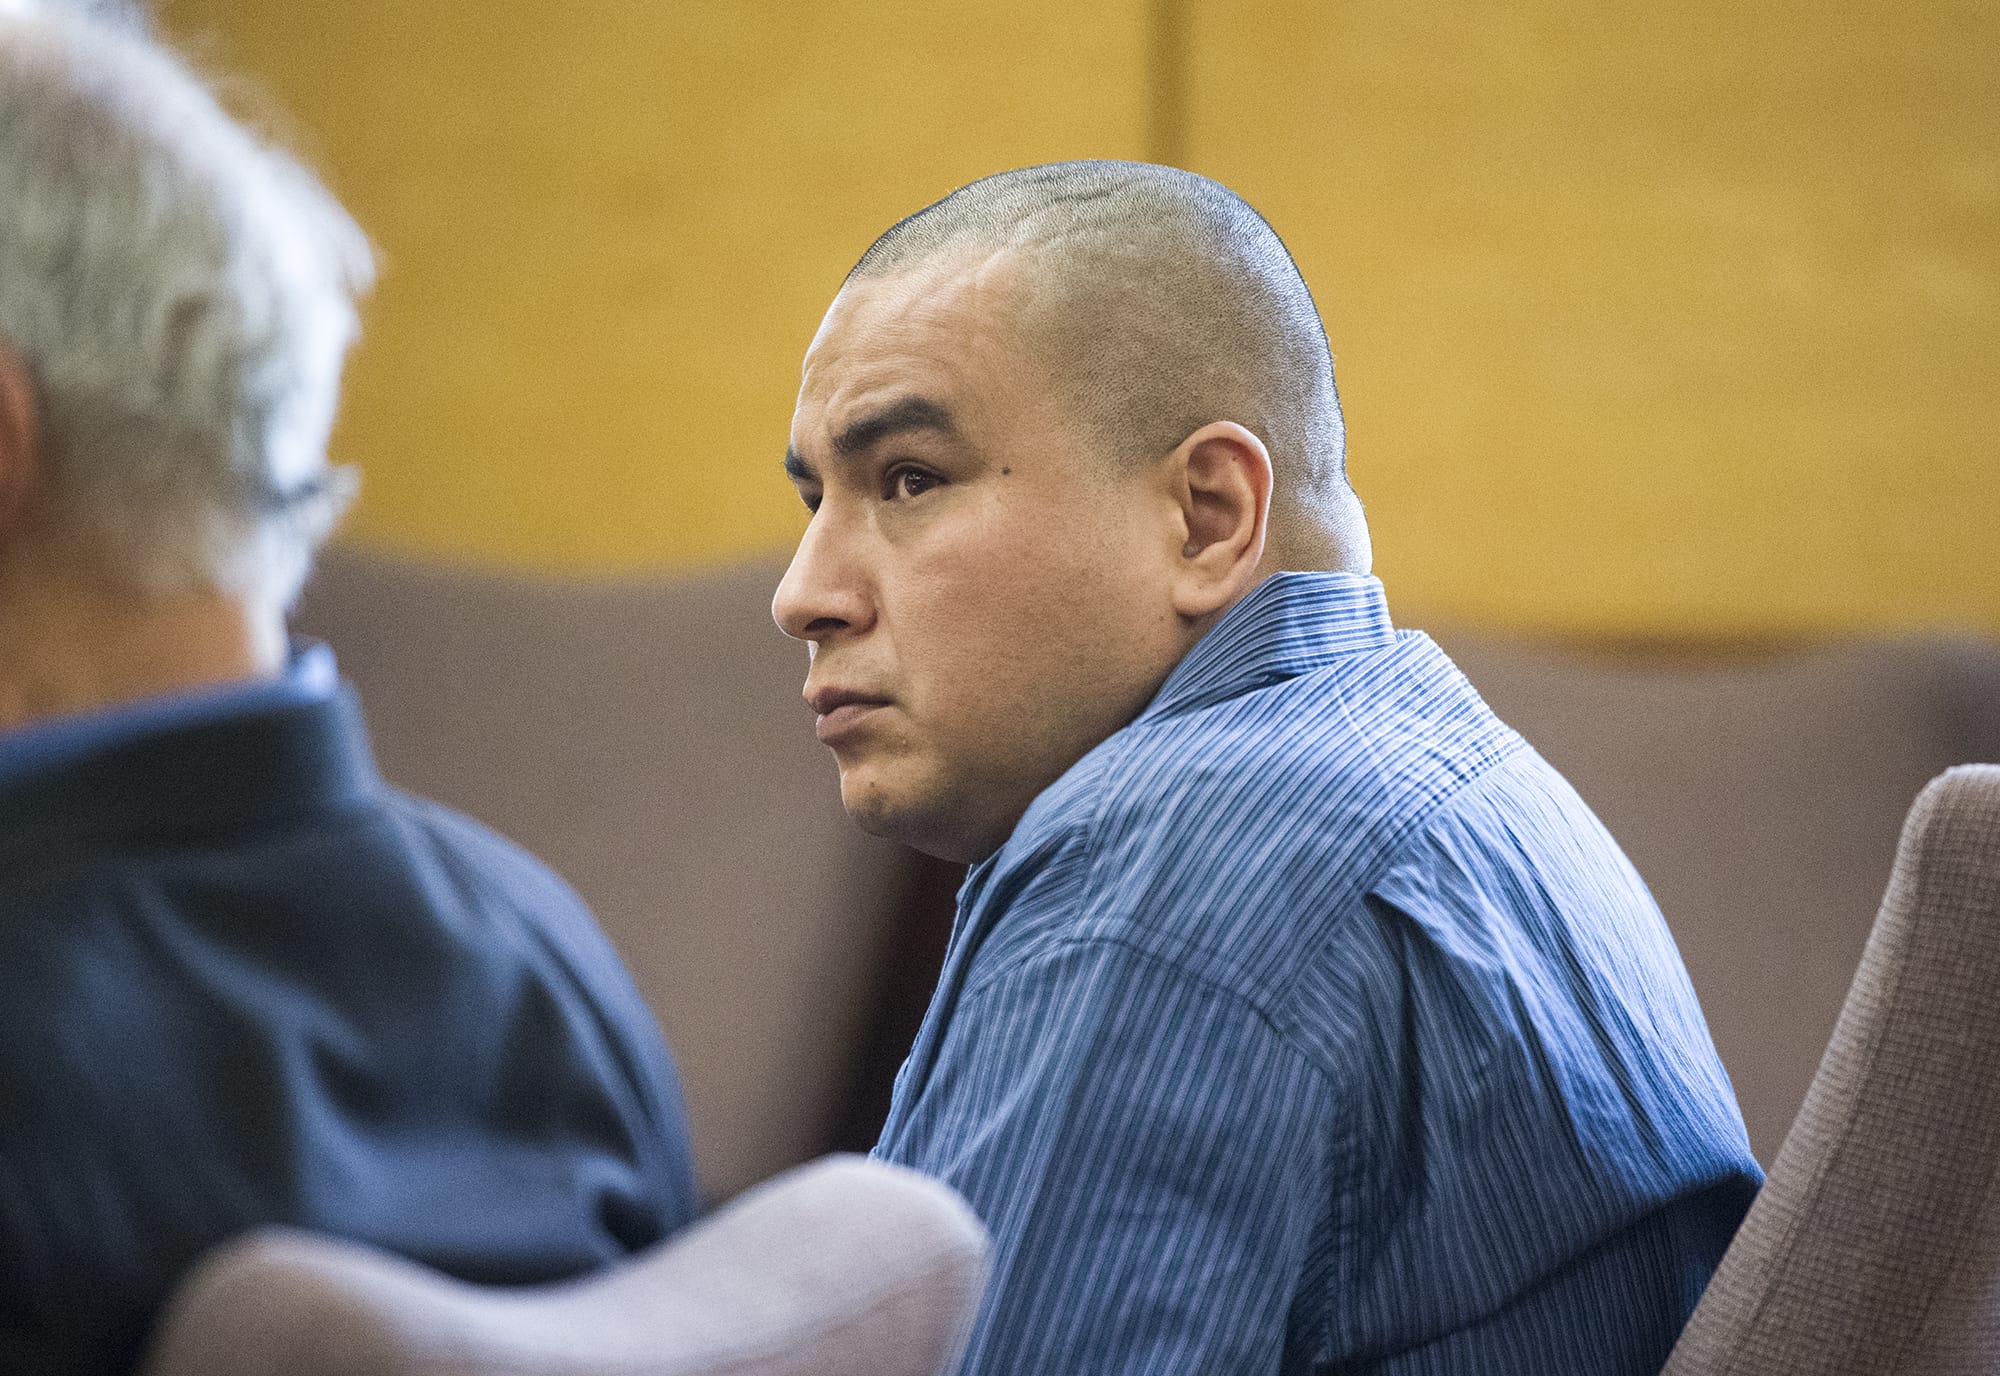 Ricardo Gutierrez, who's accused of brutally beating and stabbing a Battle Ground toddler to death in May 2016, is pictured during the start of his bench trial at the Clark County Courthouse Monday January 29, 2018.